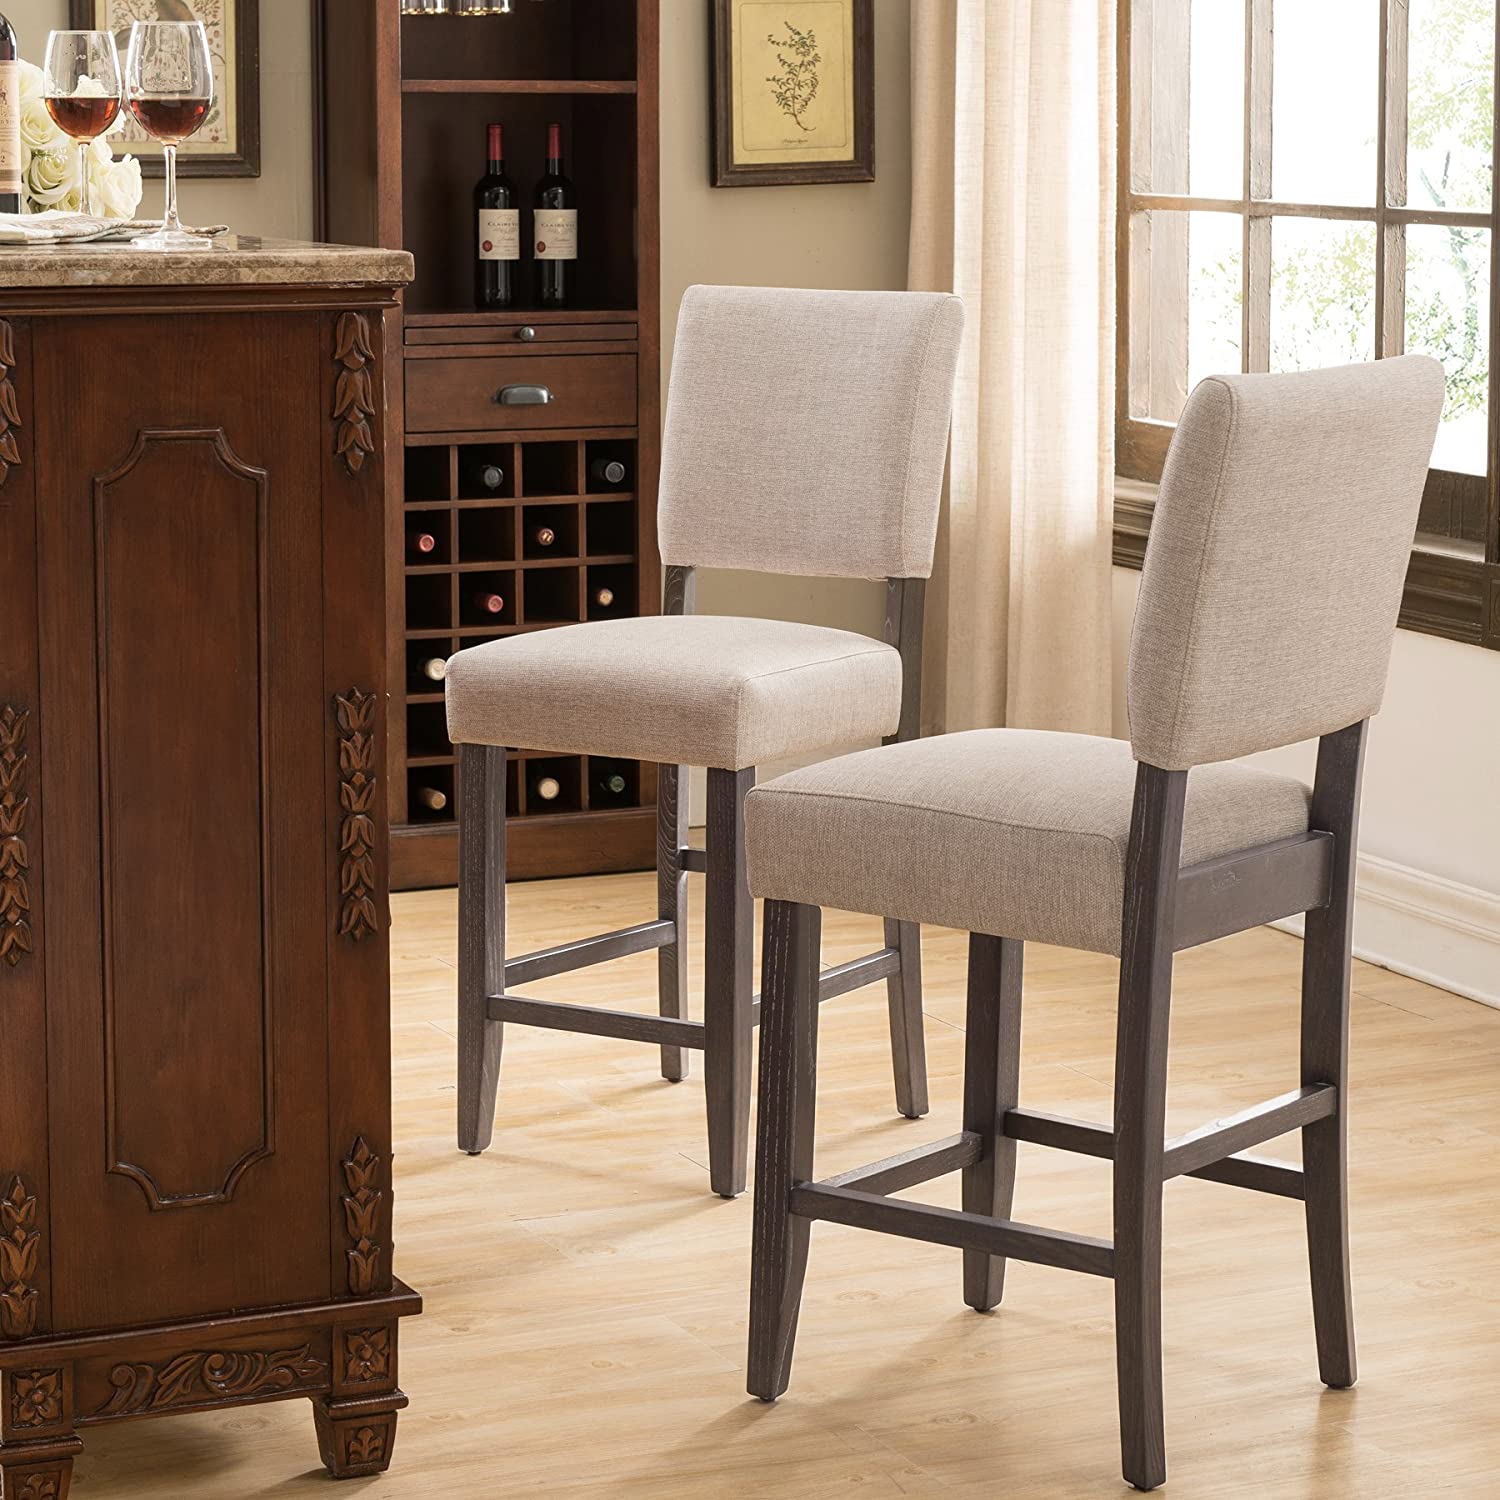 Restaurant Bar Stool Solid Wood In Fabric Finish Size And Colour Can Be